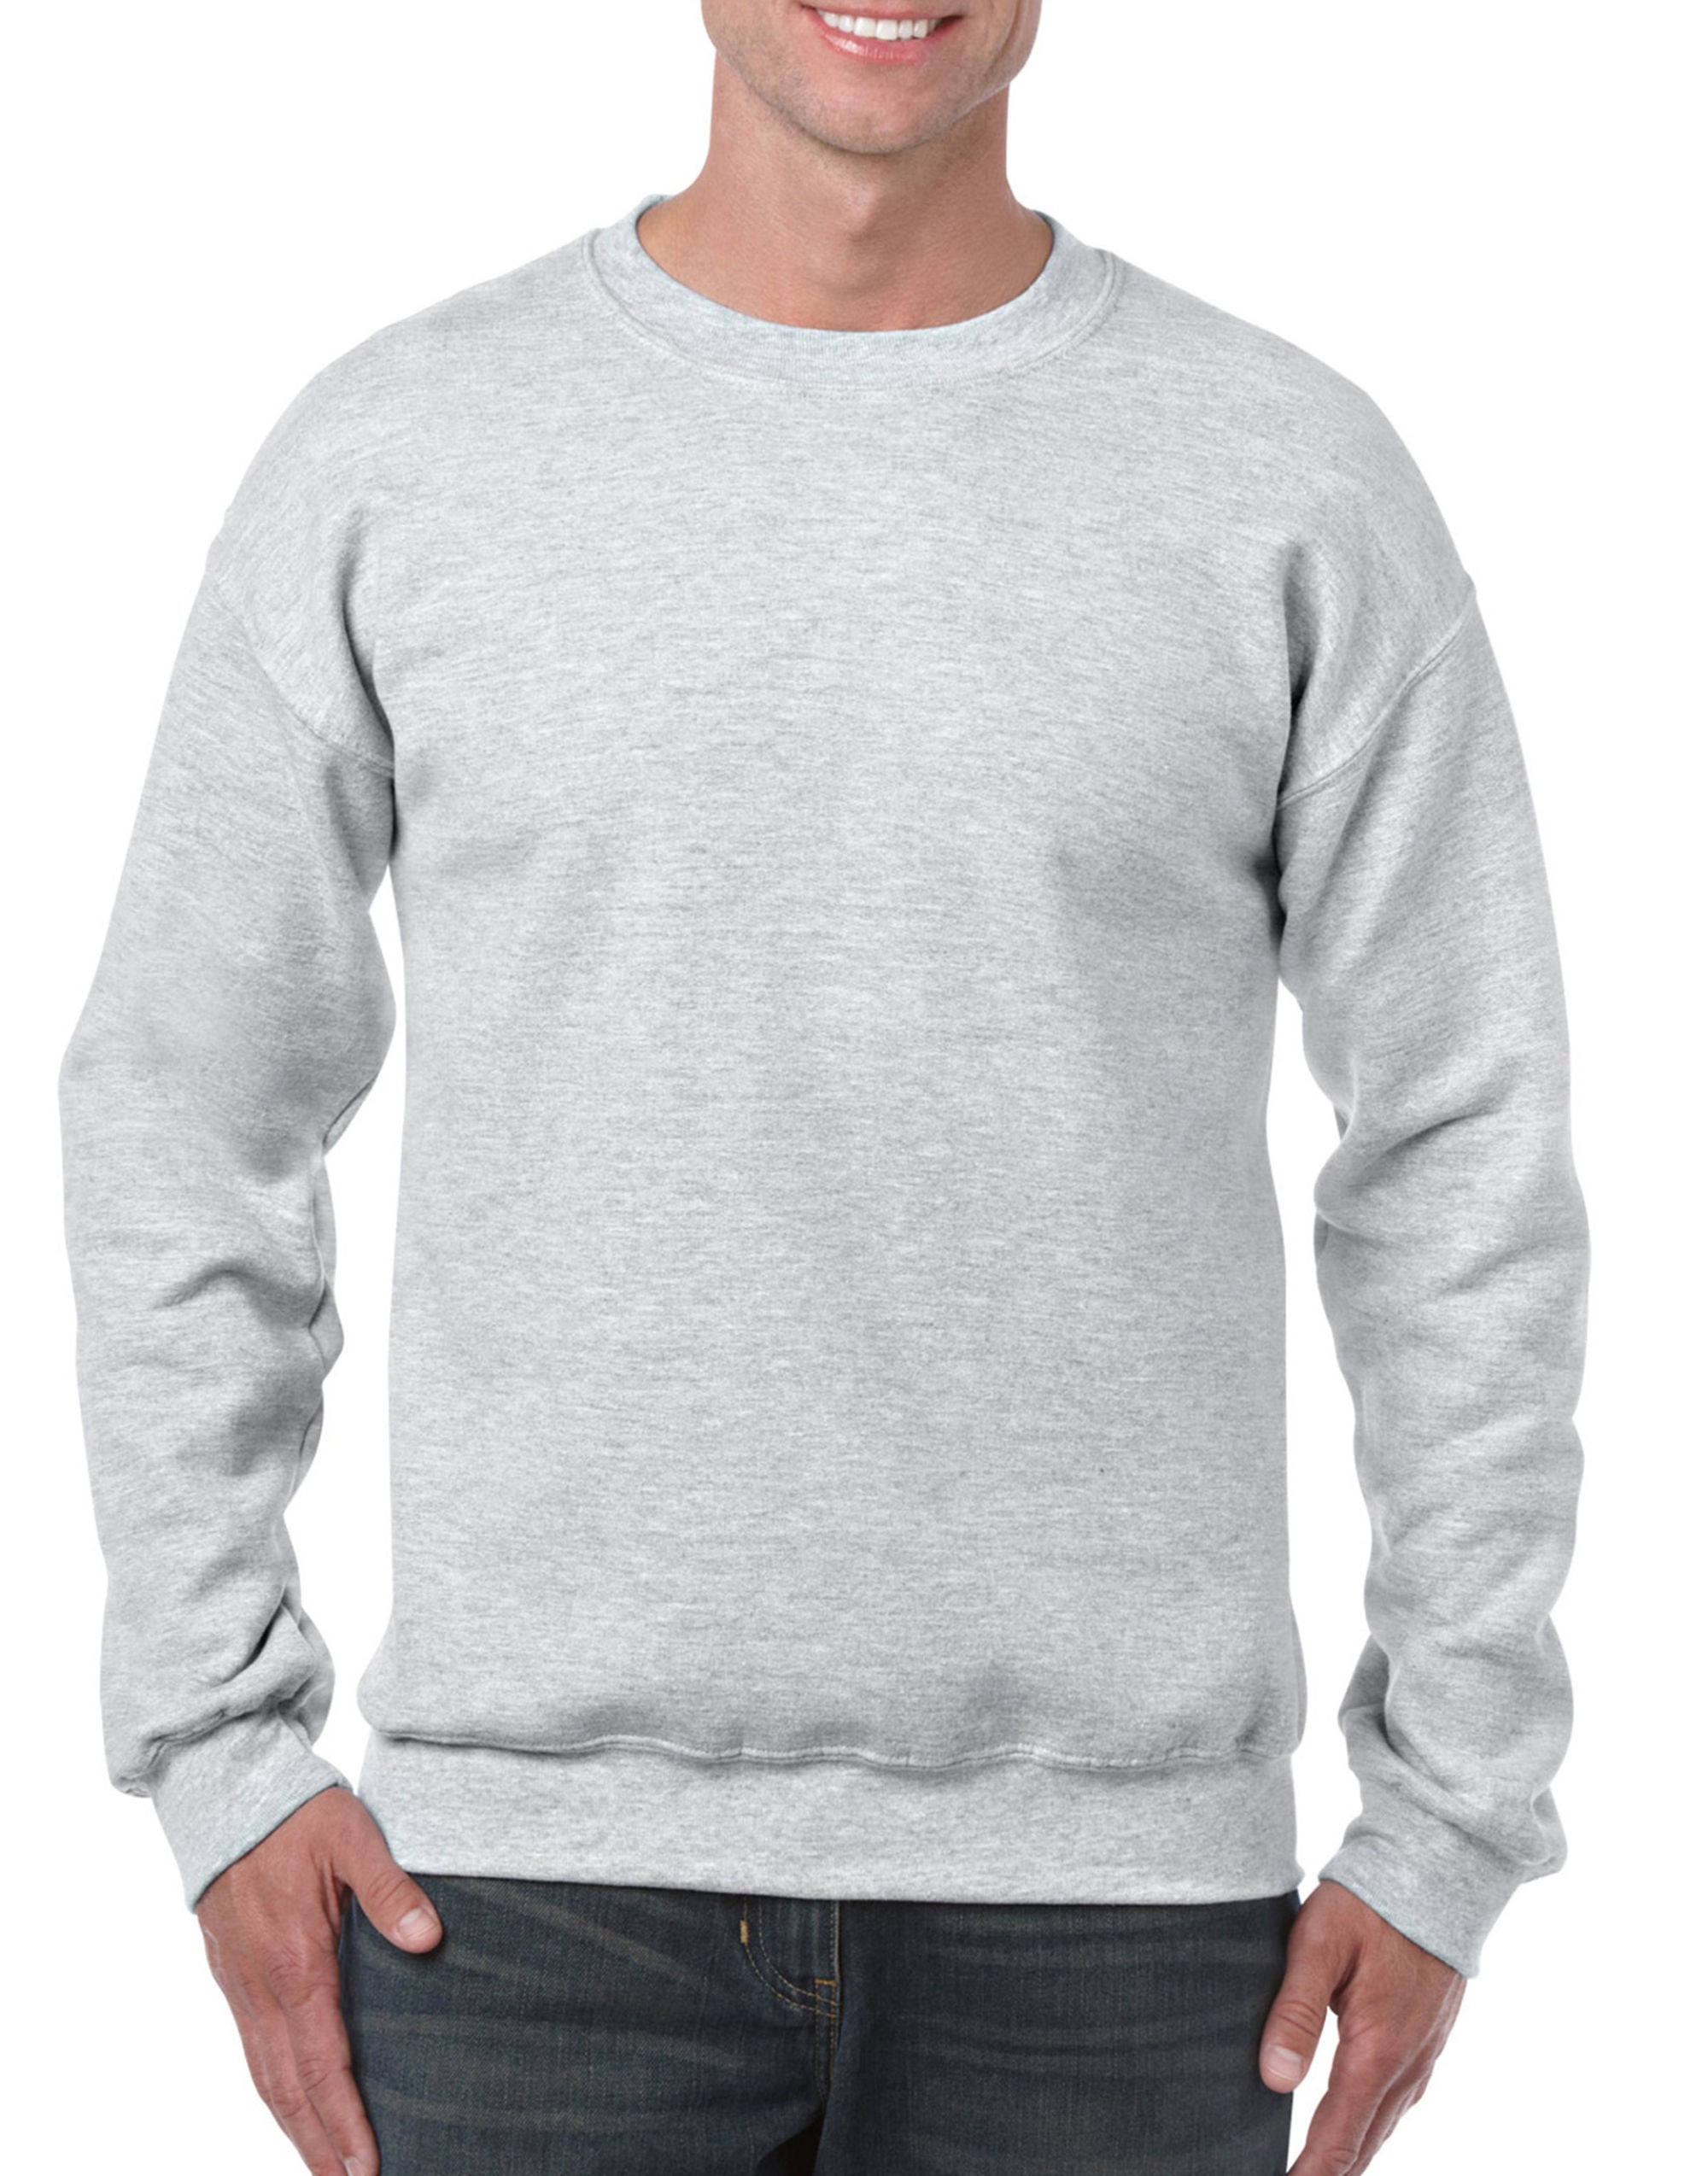 10 x Sweatshirts with Embroidered LOGO Front & PRINT on back